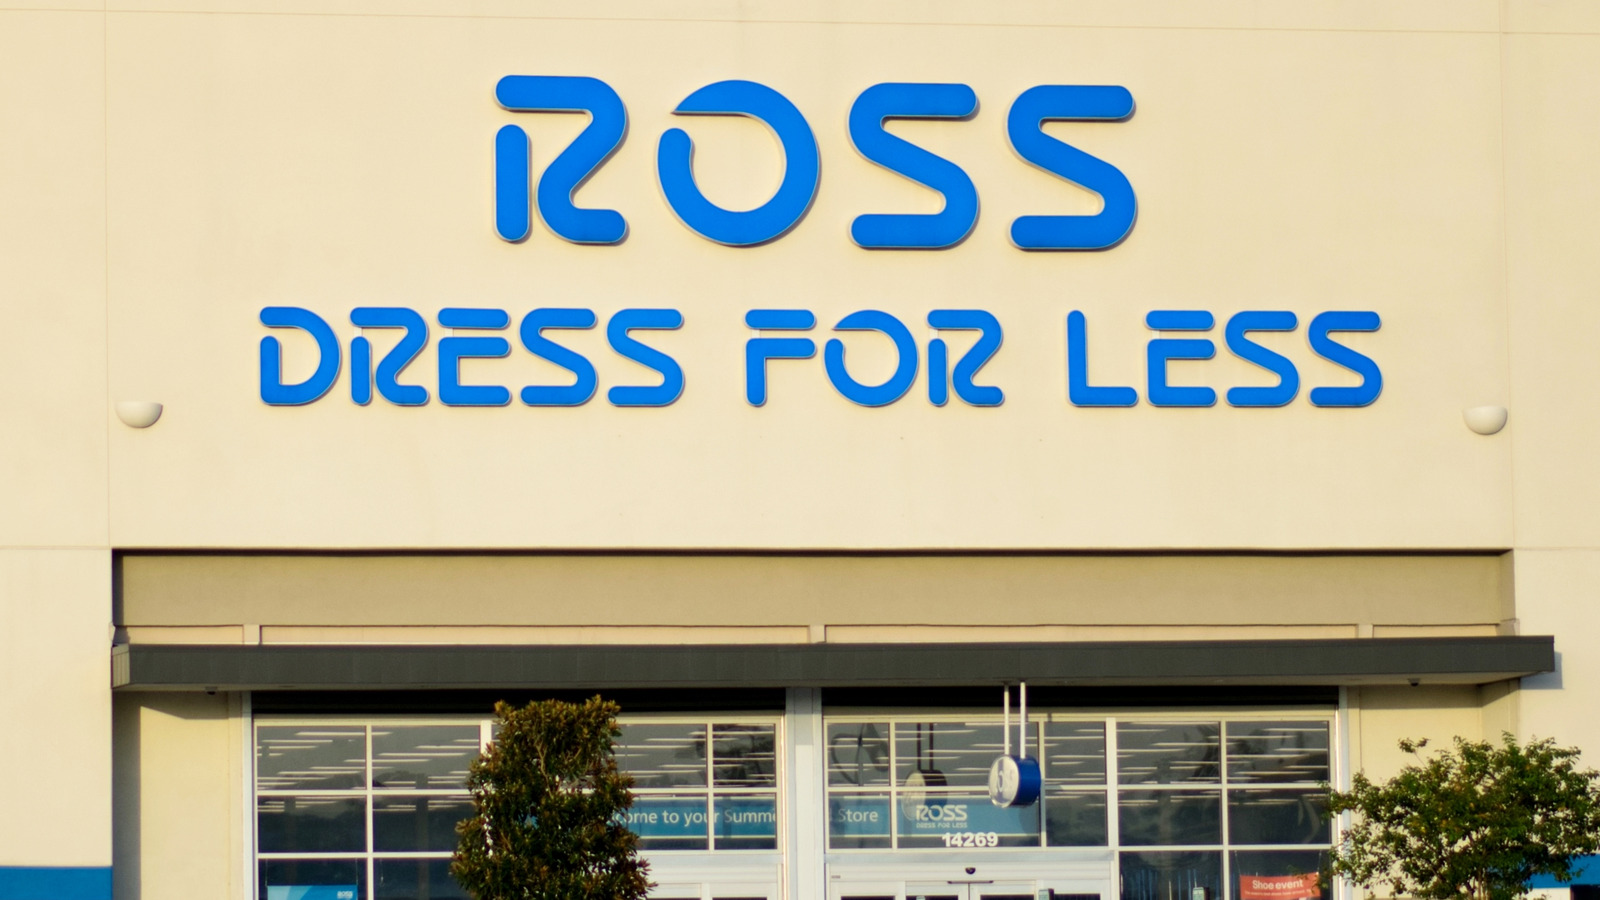 COME WITH ME ROSS DRESS FOR LESS 2022 - YouTube